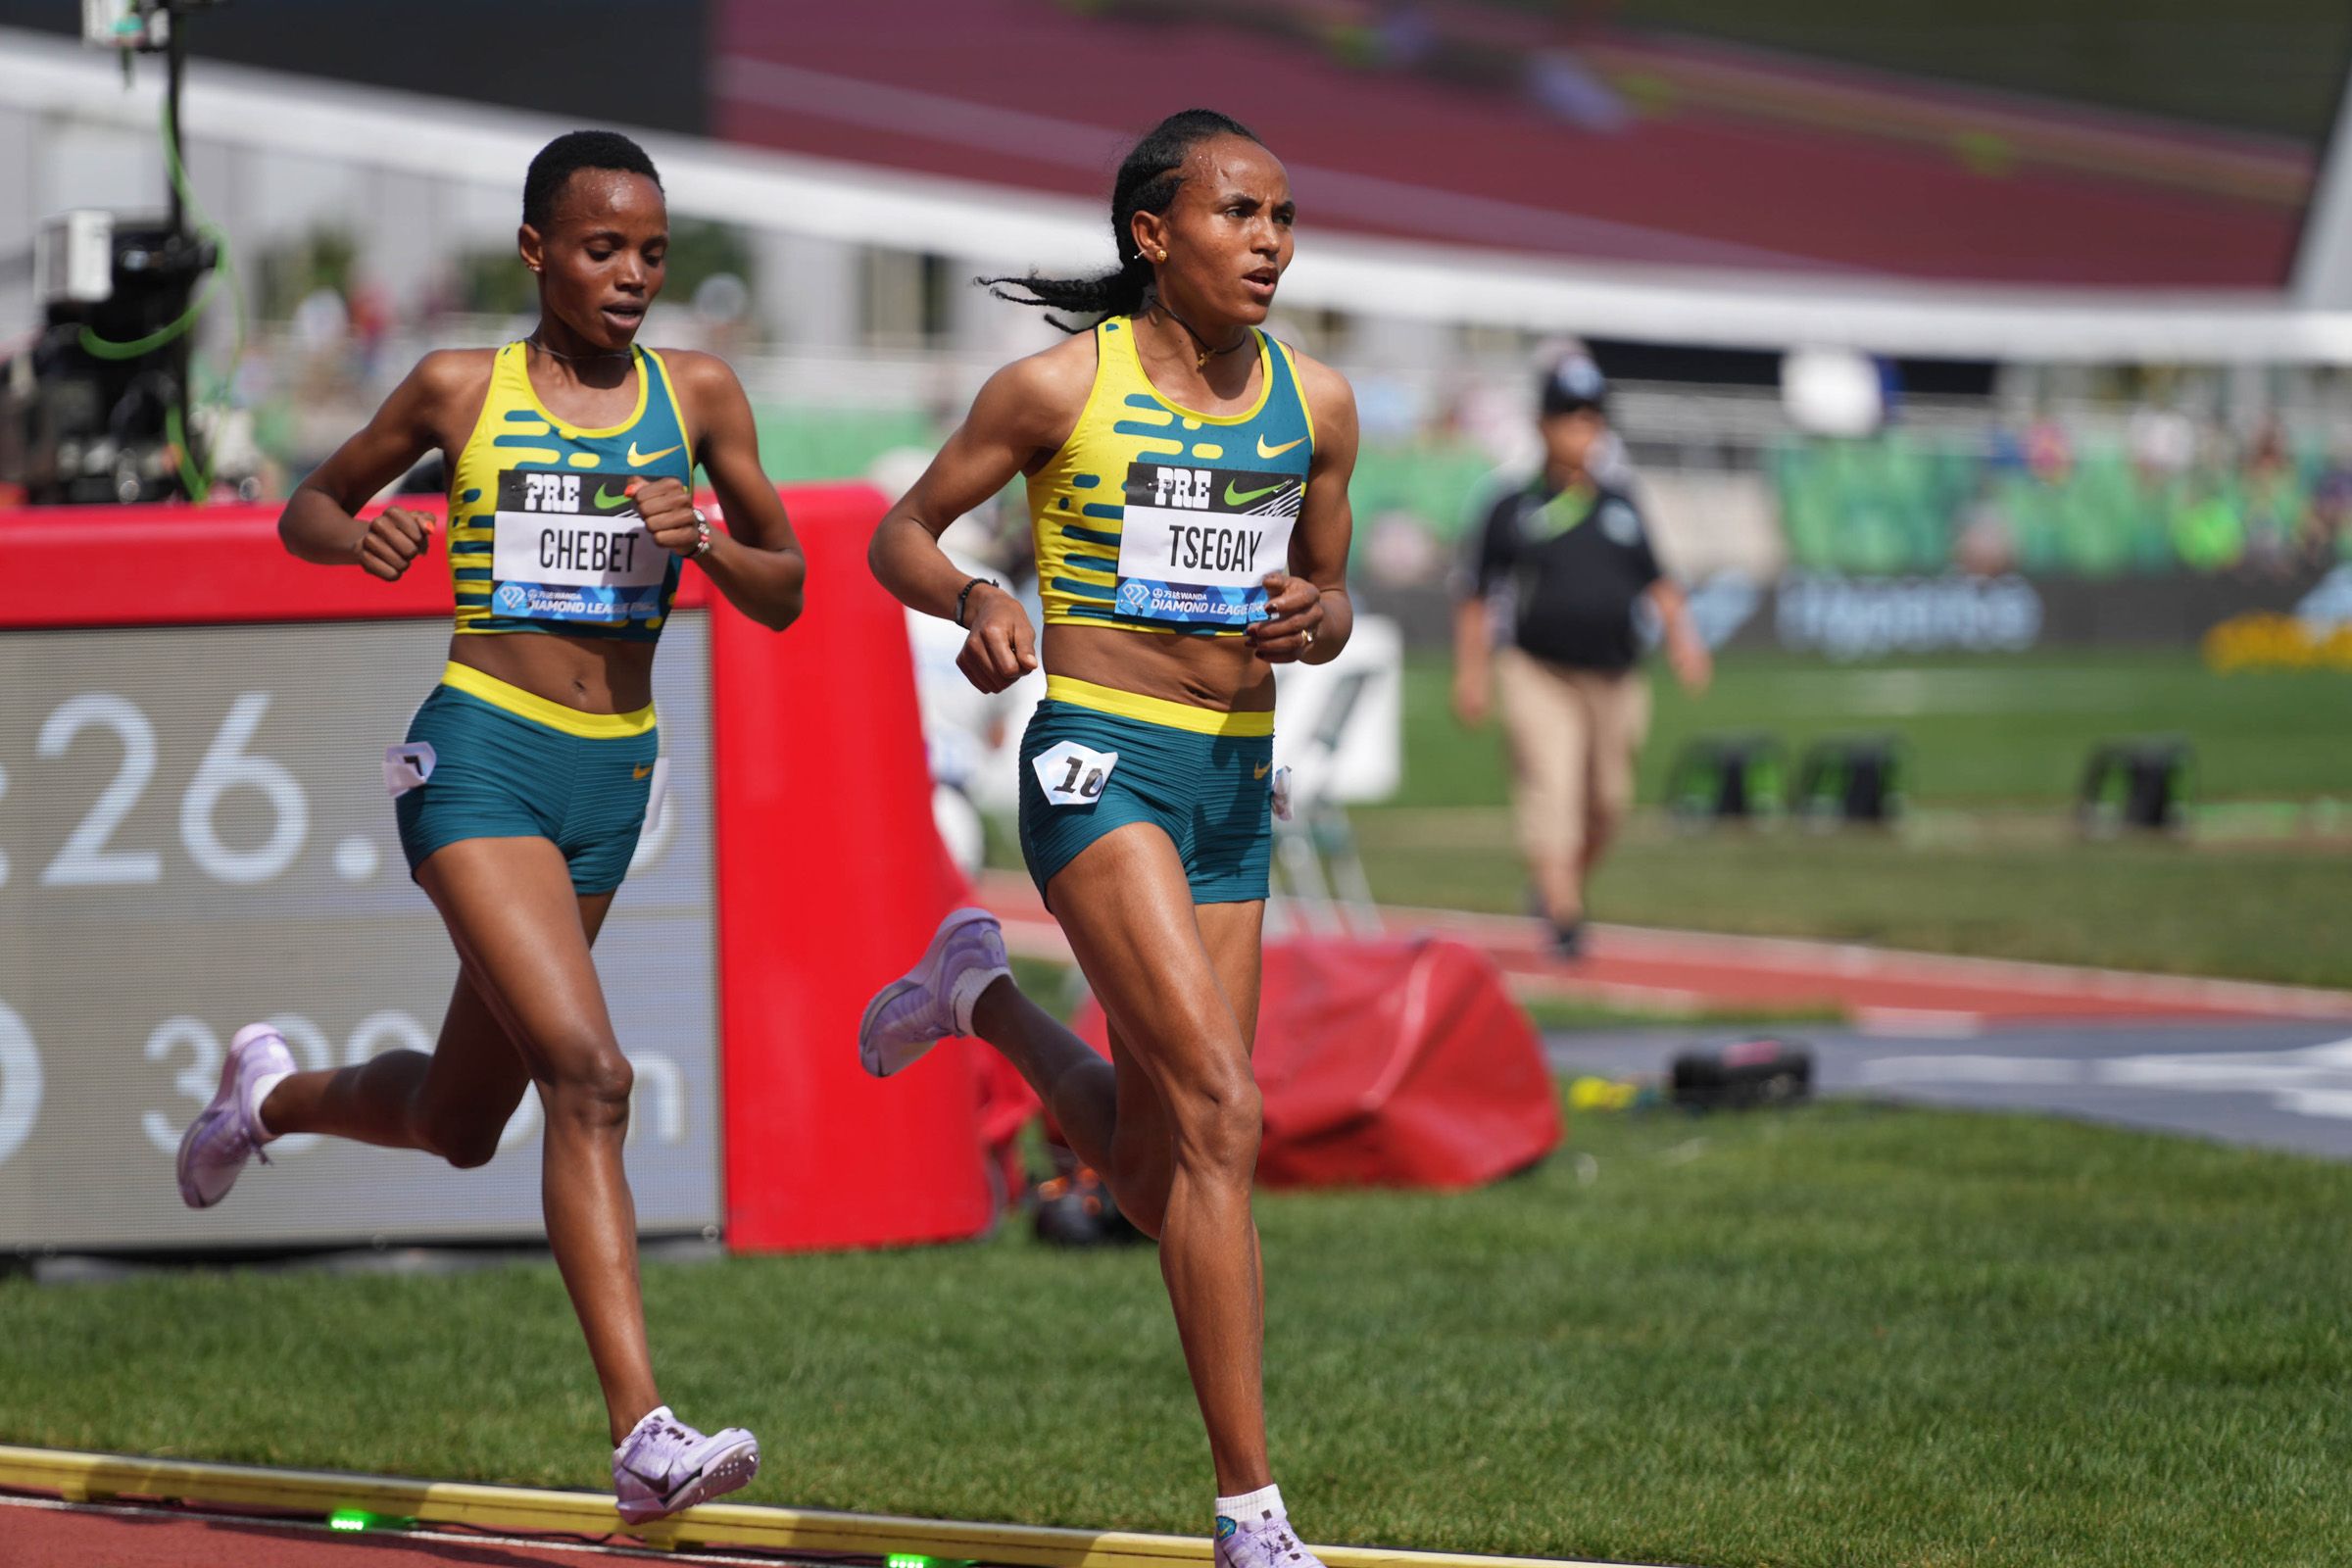 Gudaf Tsegay on her way to breaking the world 5000m record in Eugene